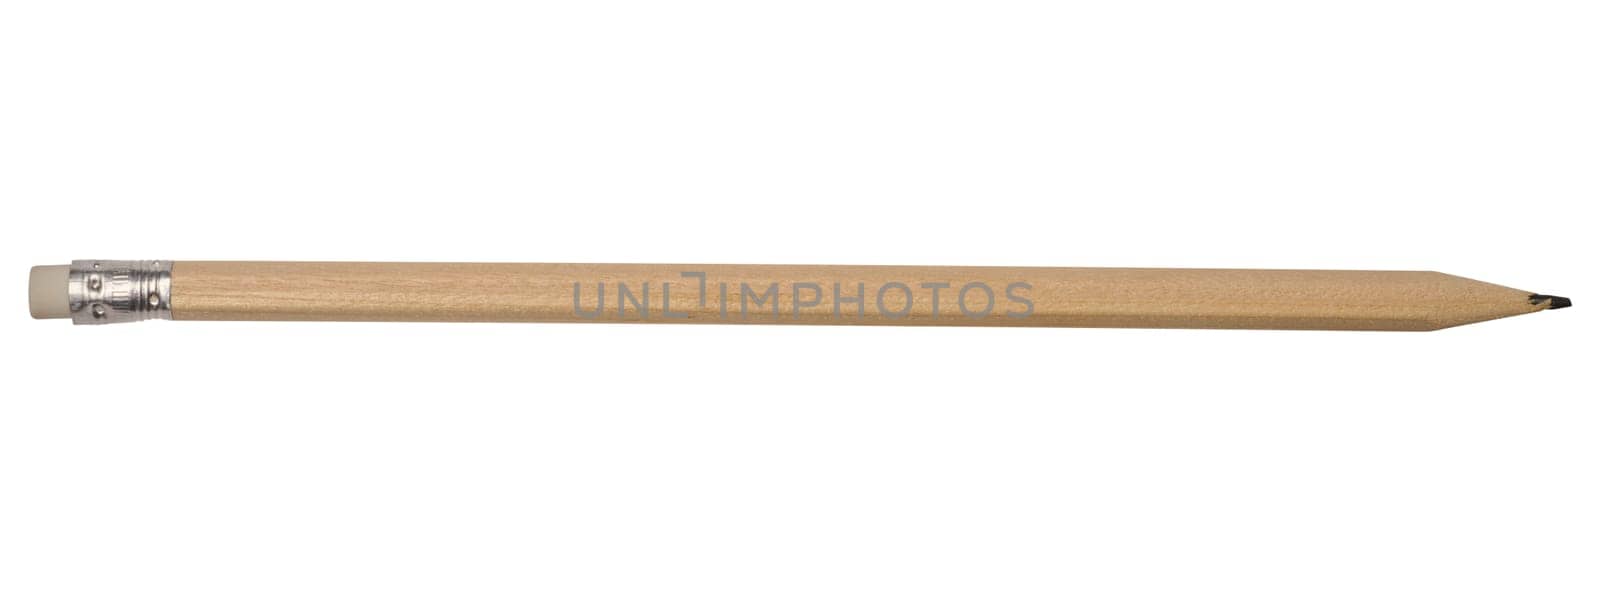 Wooden graphite pencil with an eraser at the end on an isolated background by ndanko